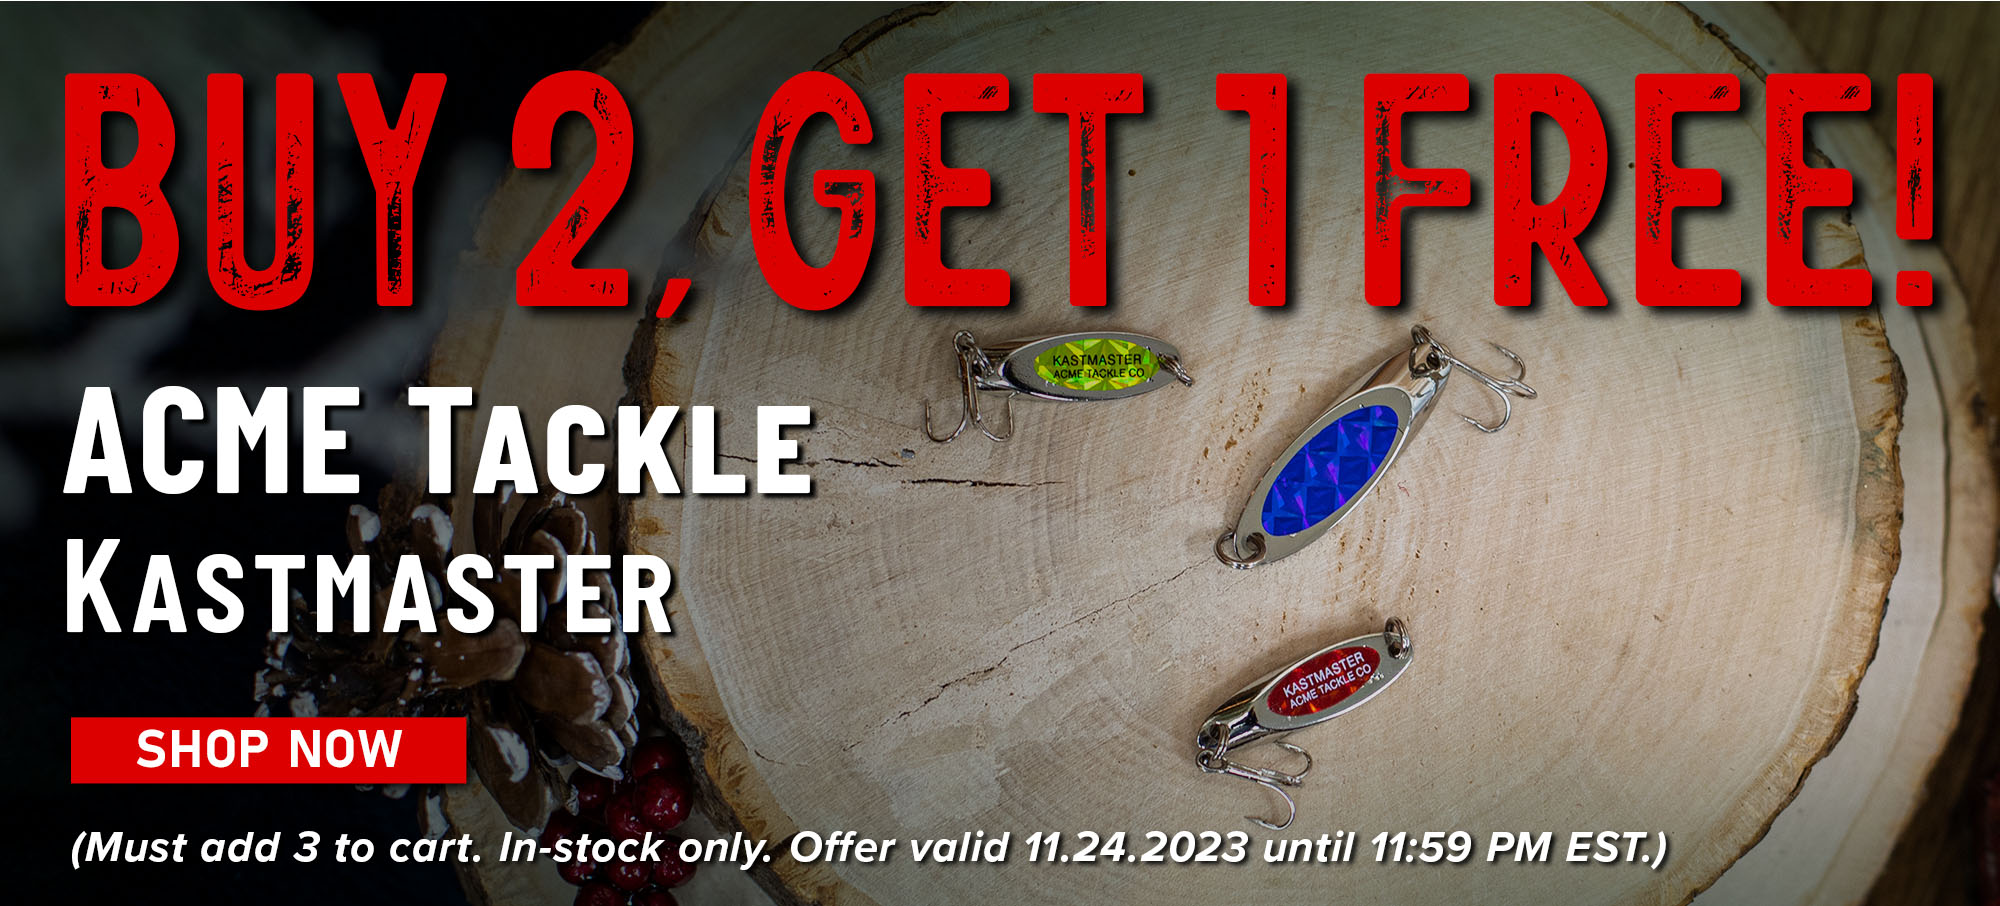 Buy 2, Get 1 Free! ACME Tackle Kastmaster Shop Now (Must add 3 to cart. In-stock only. Offer valid 11.24.2023 until 11:59 PM EST.)